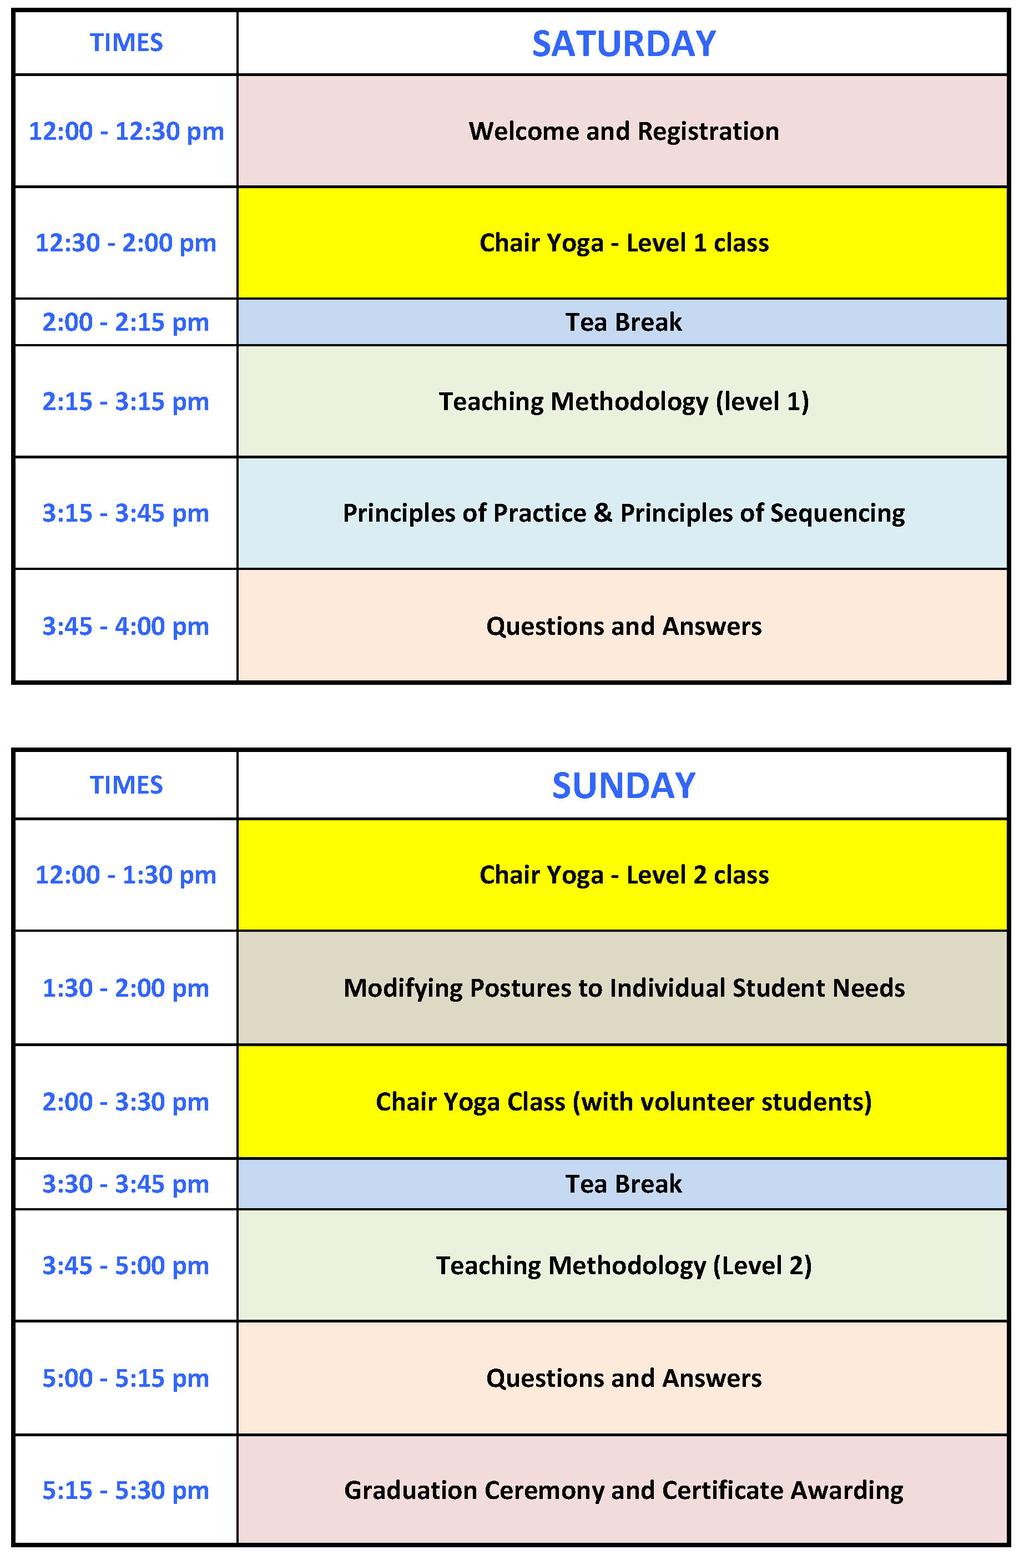 Timetable Required Reading The Knoff Yoga Teacher Training Handbook. This handbook is provided to you during the Discovery Teacher Training course.